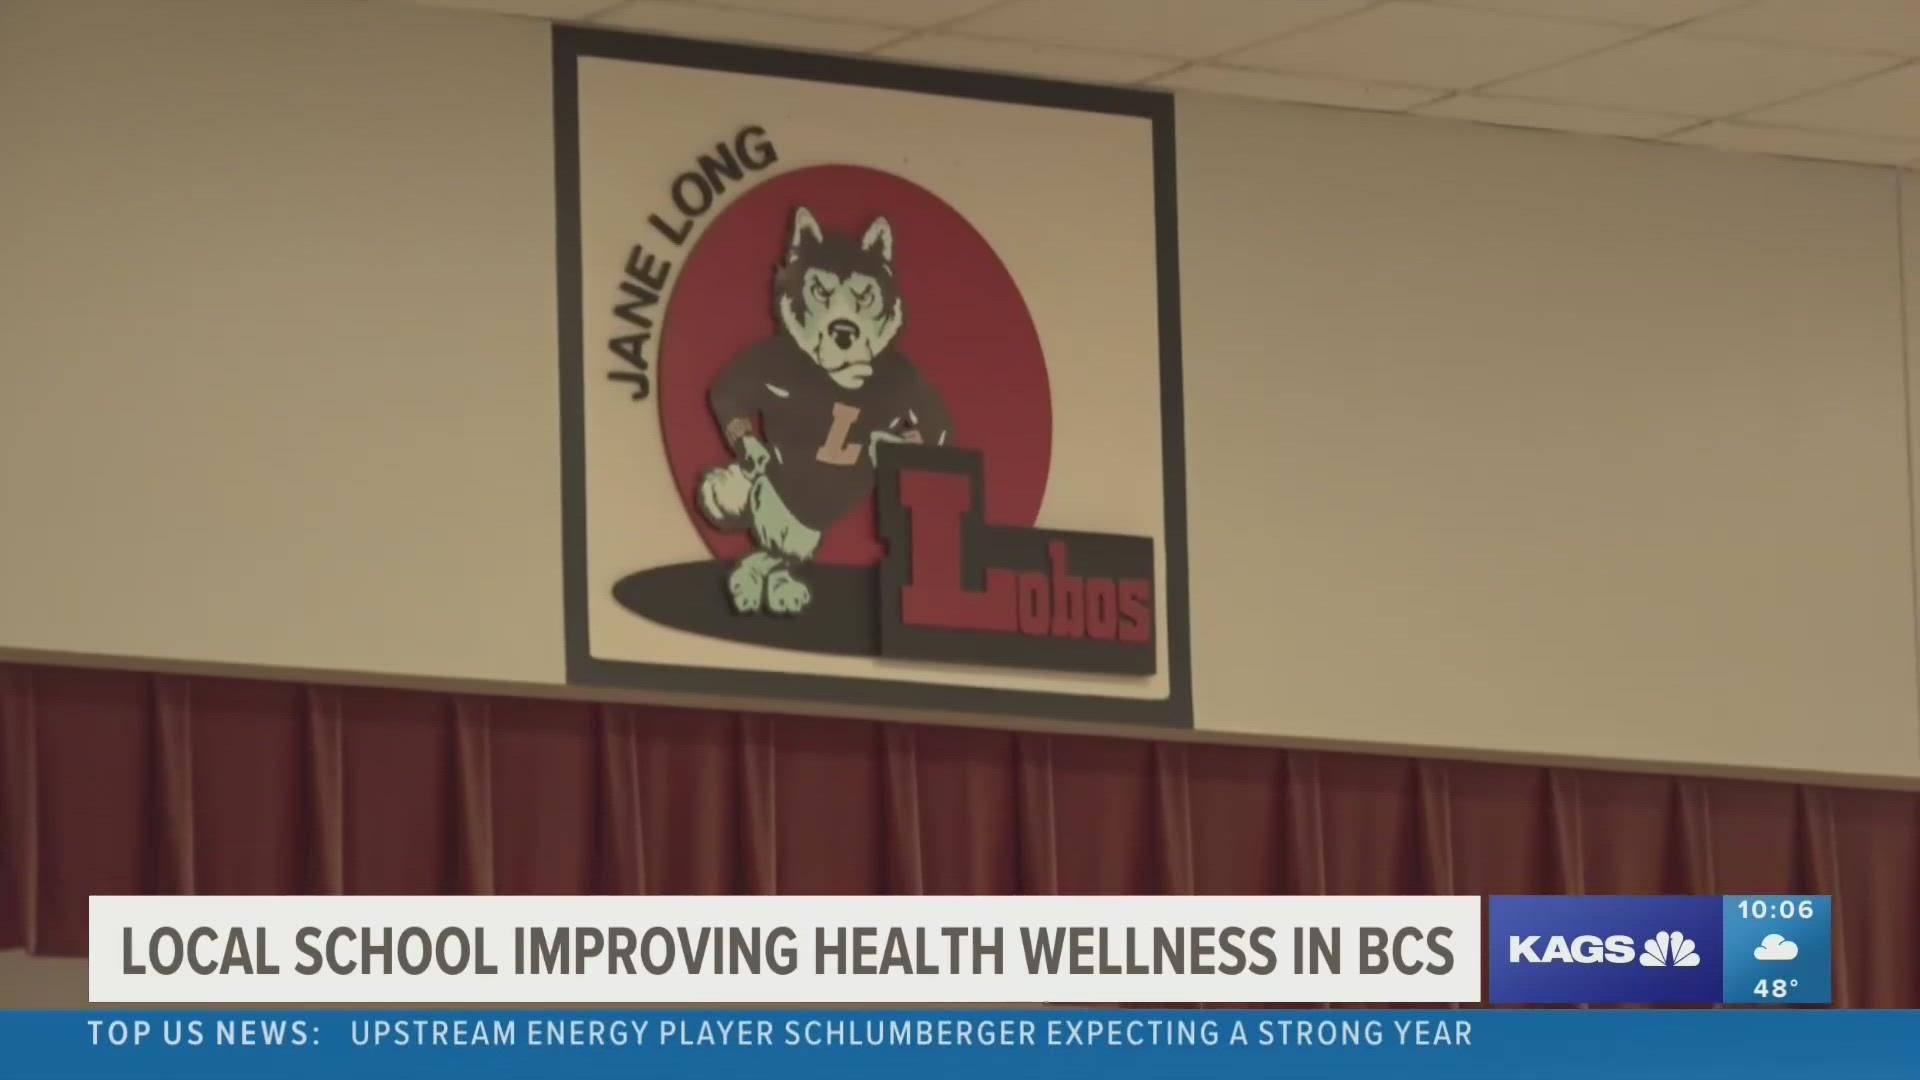 The Progress Toward Wellness programs allows a safe space for children to discuss certain topics and provide resources to families that are struggling.